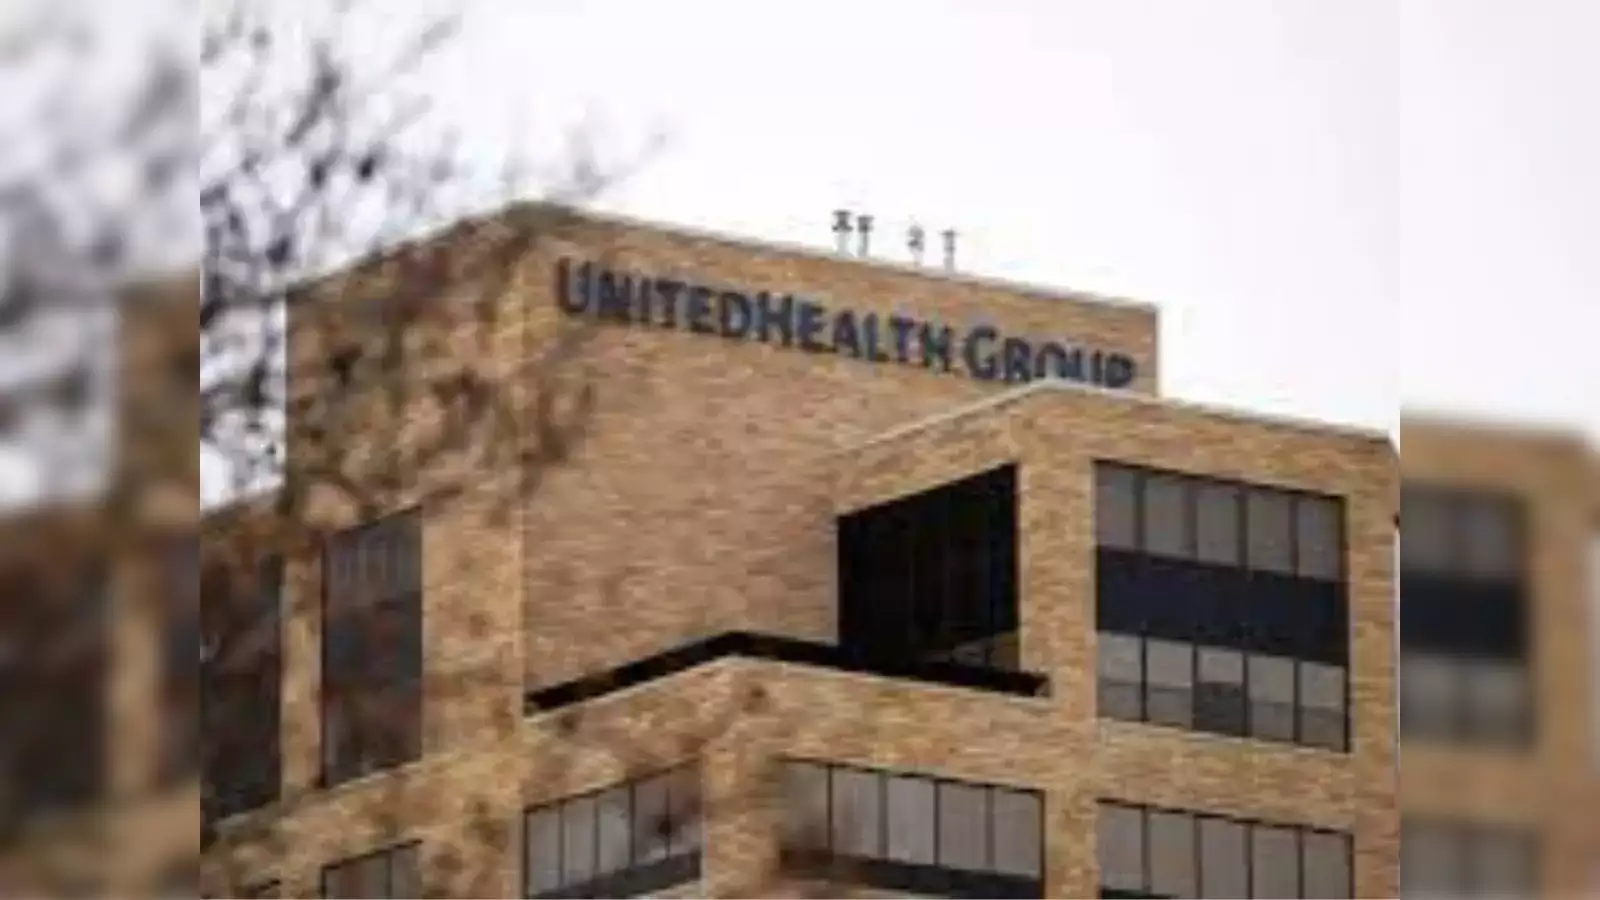 UnitedHealth Group Distributed Over $3.3 Billion to Healthcare Providers Affected by Cyberattacks